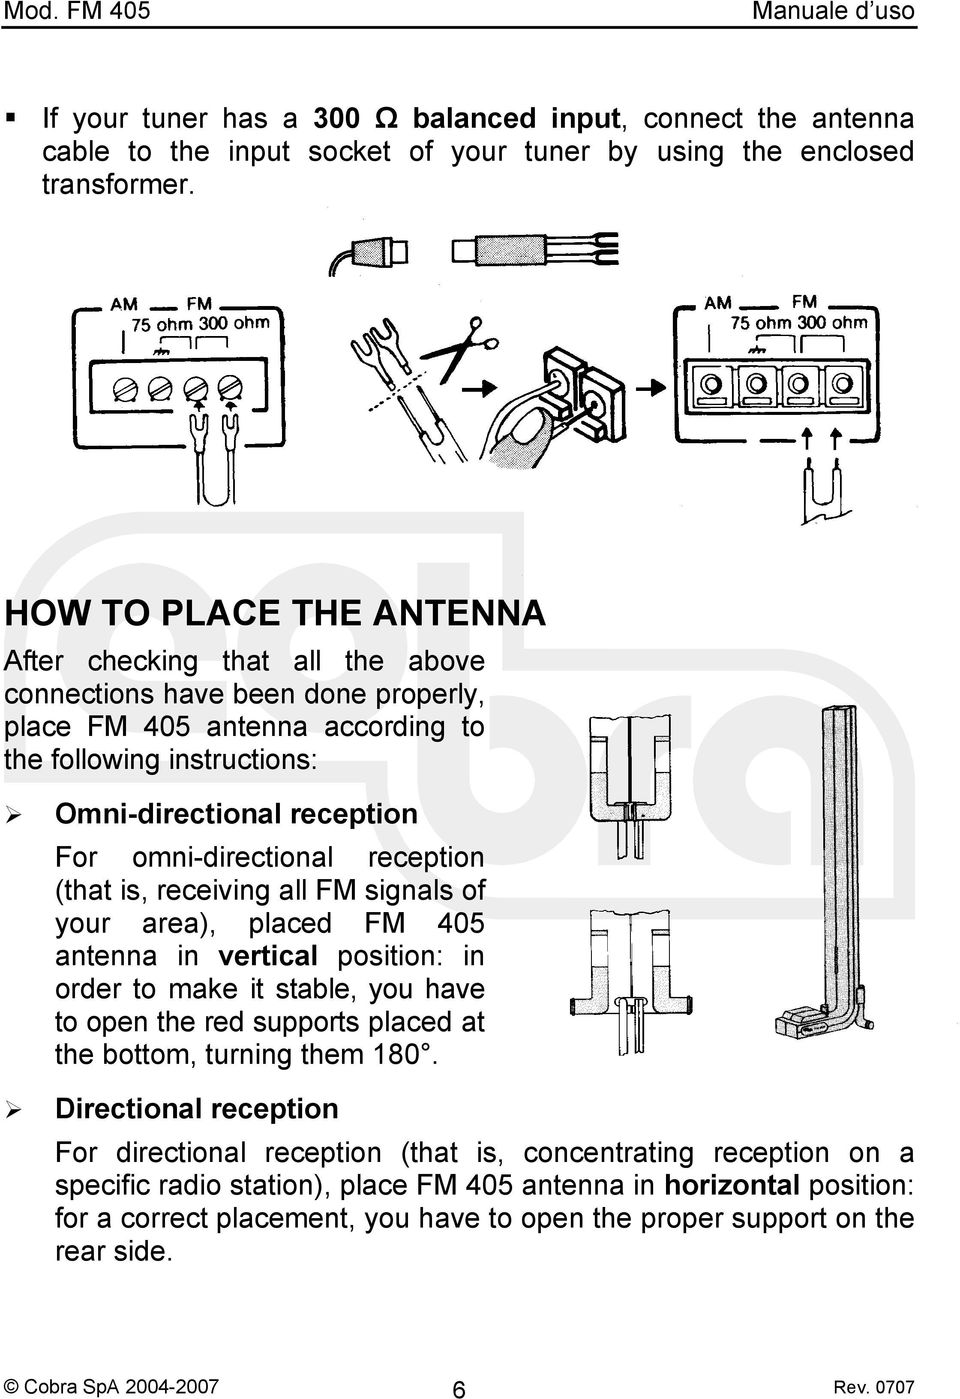 omni-directional reception (that is, receiving all FM signals of your area), placed FM 405 antenna in vertical position: in order to make it stable, you have to open the red supports placed at the